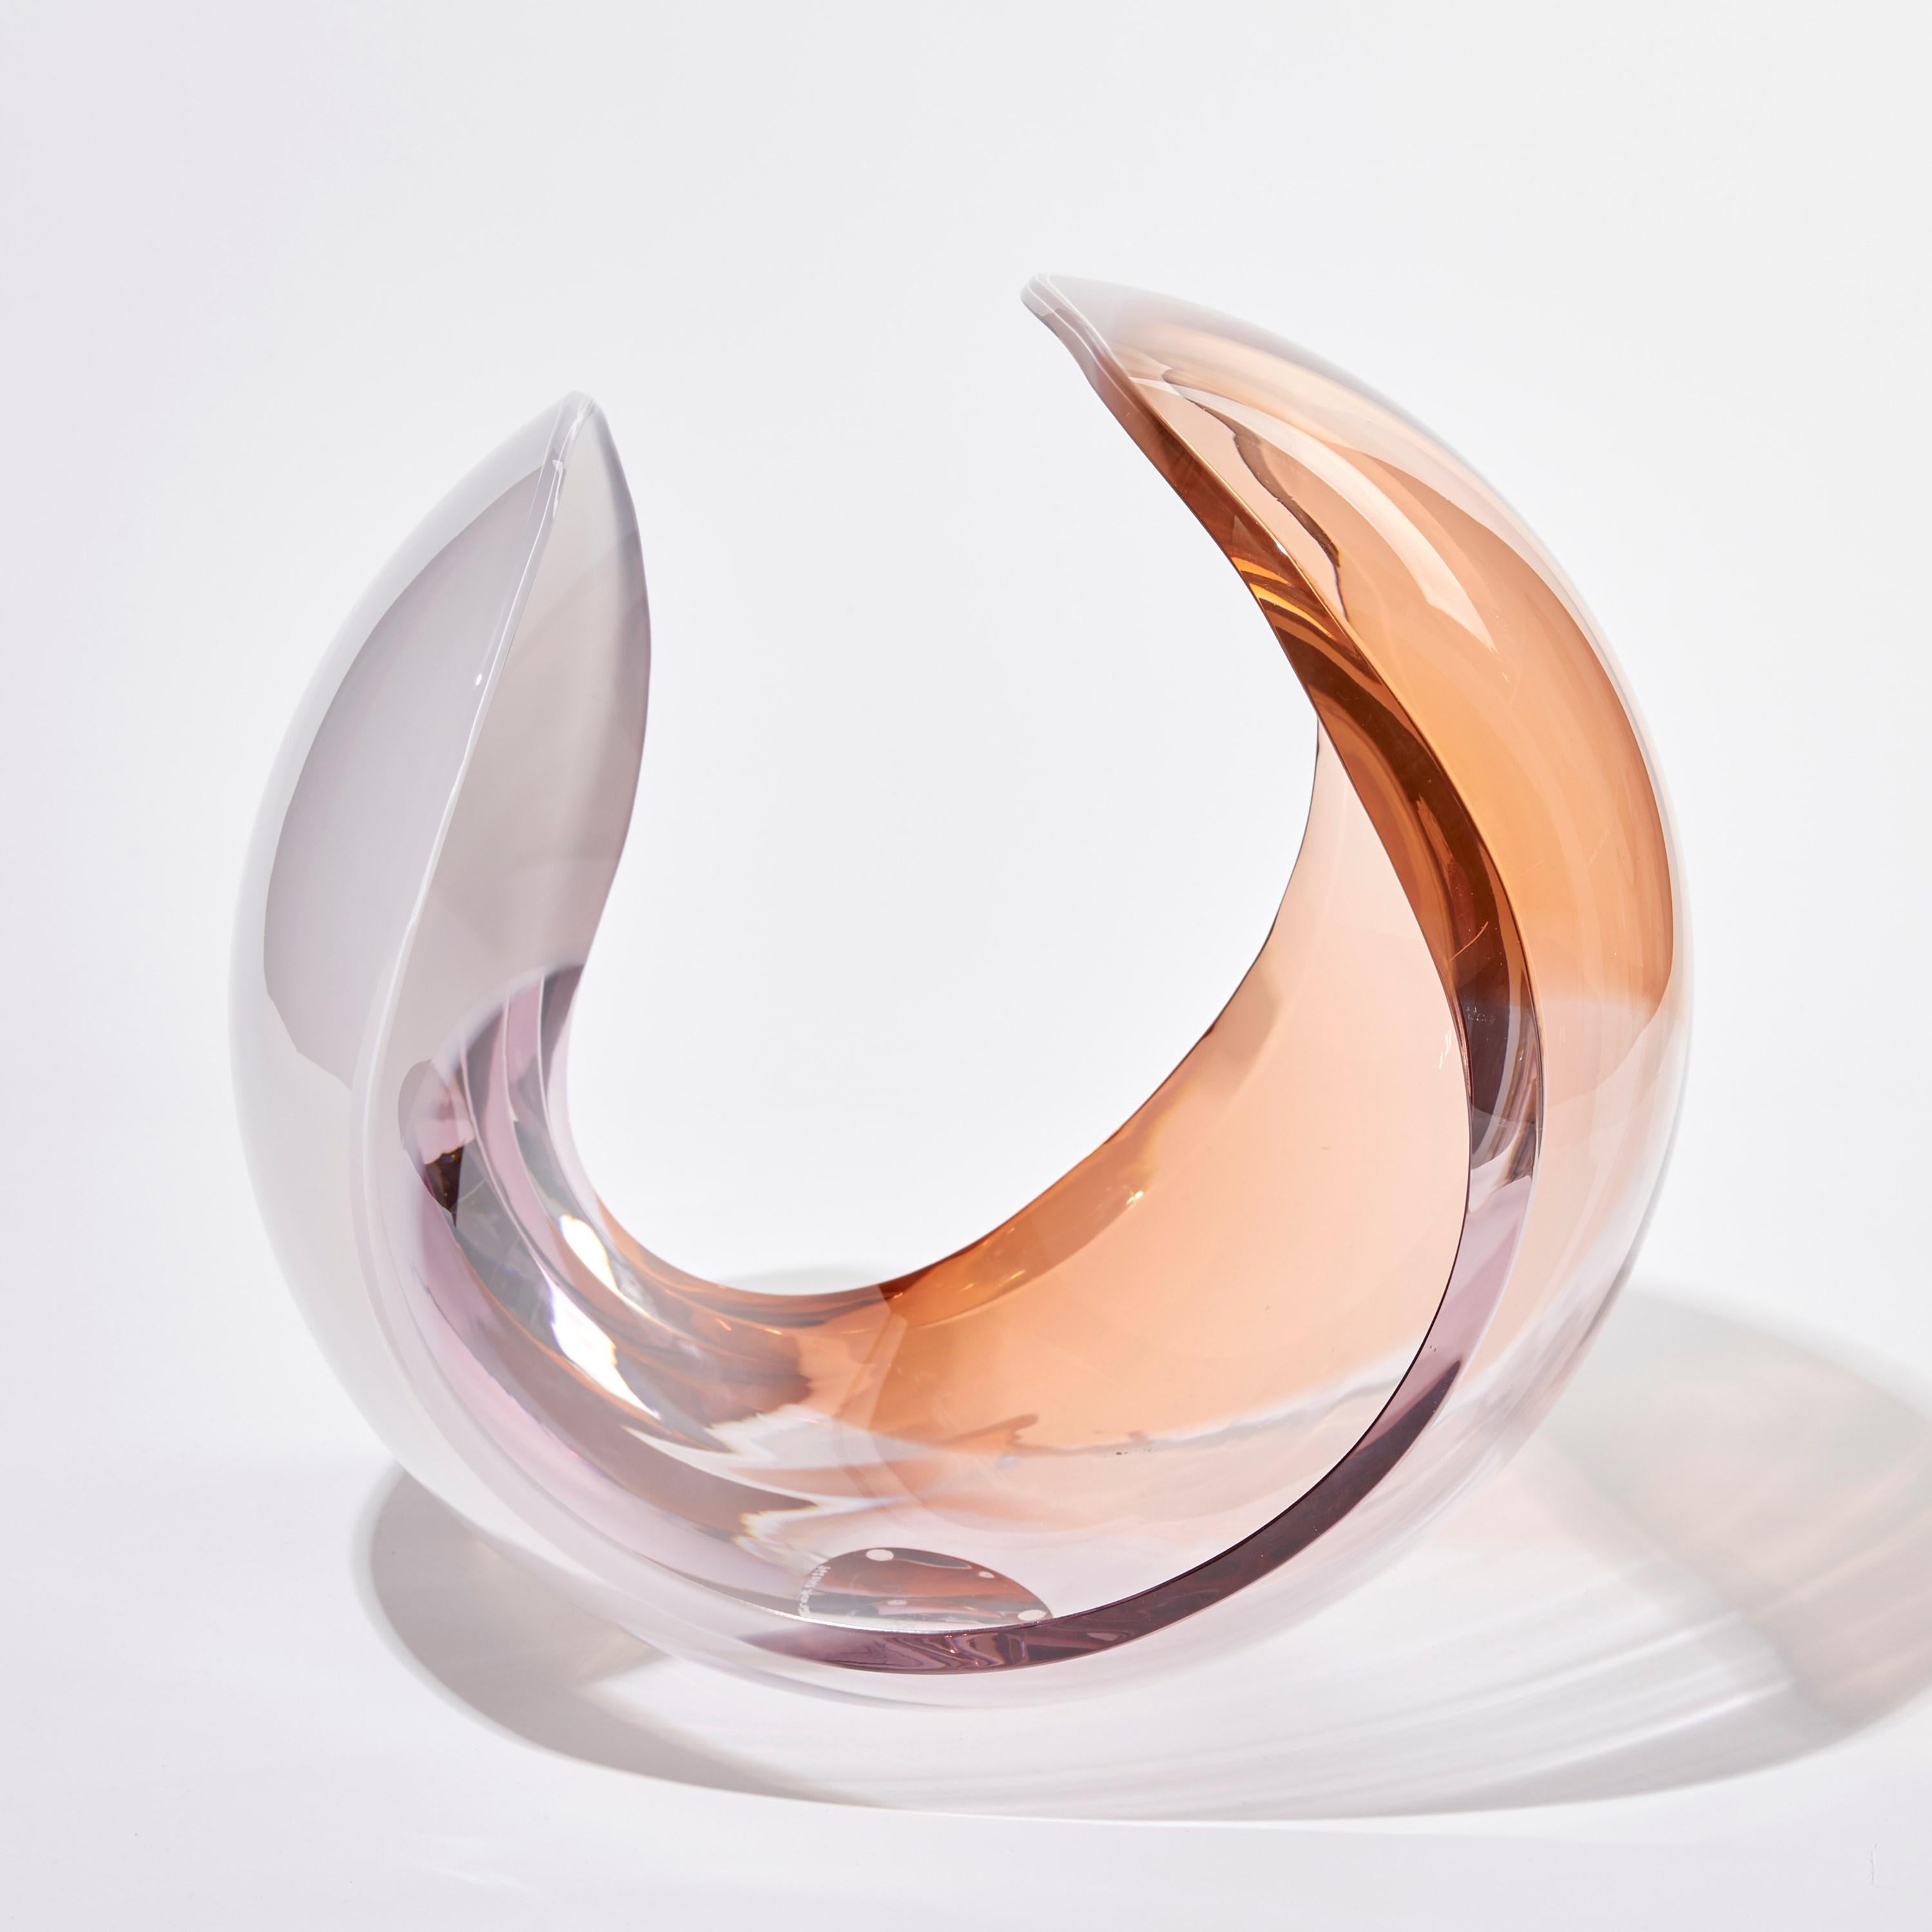 Swedish Planet in Amber & Pink a Unique Glass Sculpture & Centrepiece by Lena Bergström